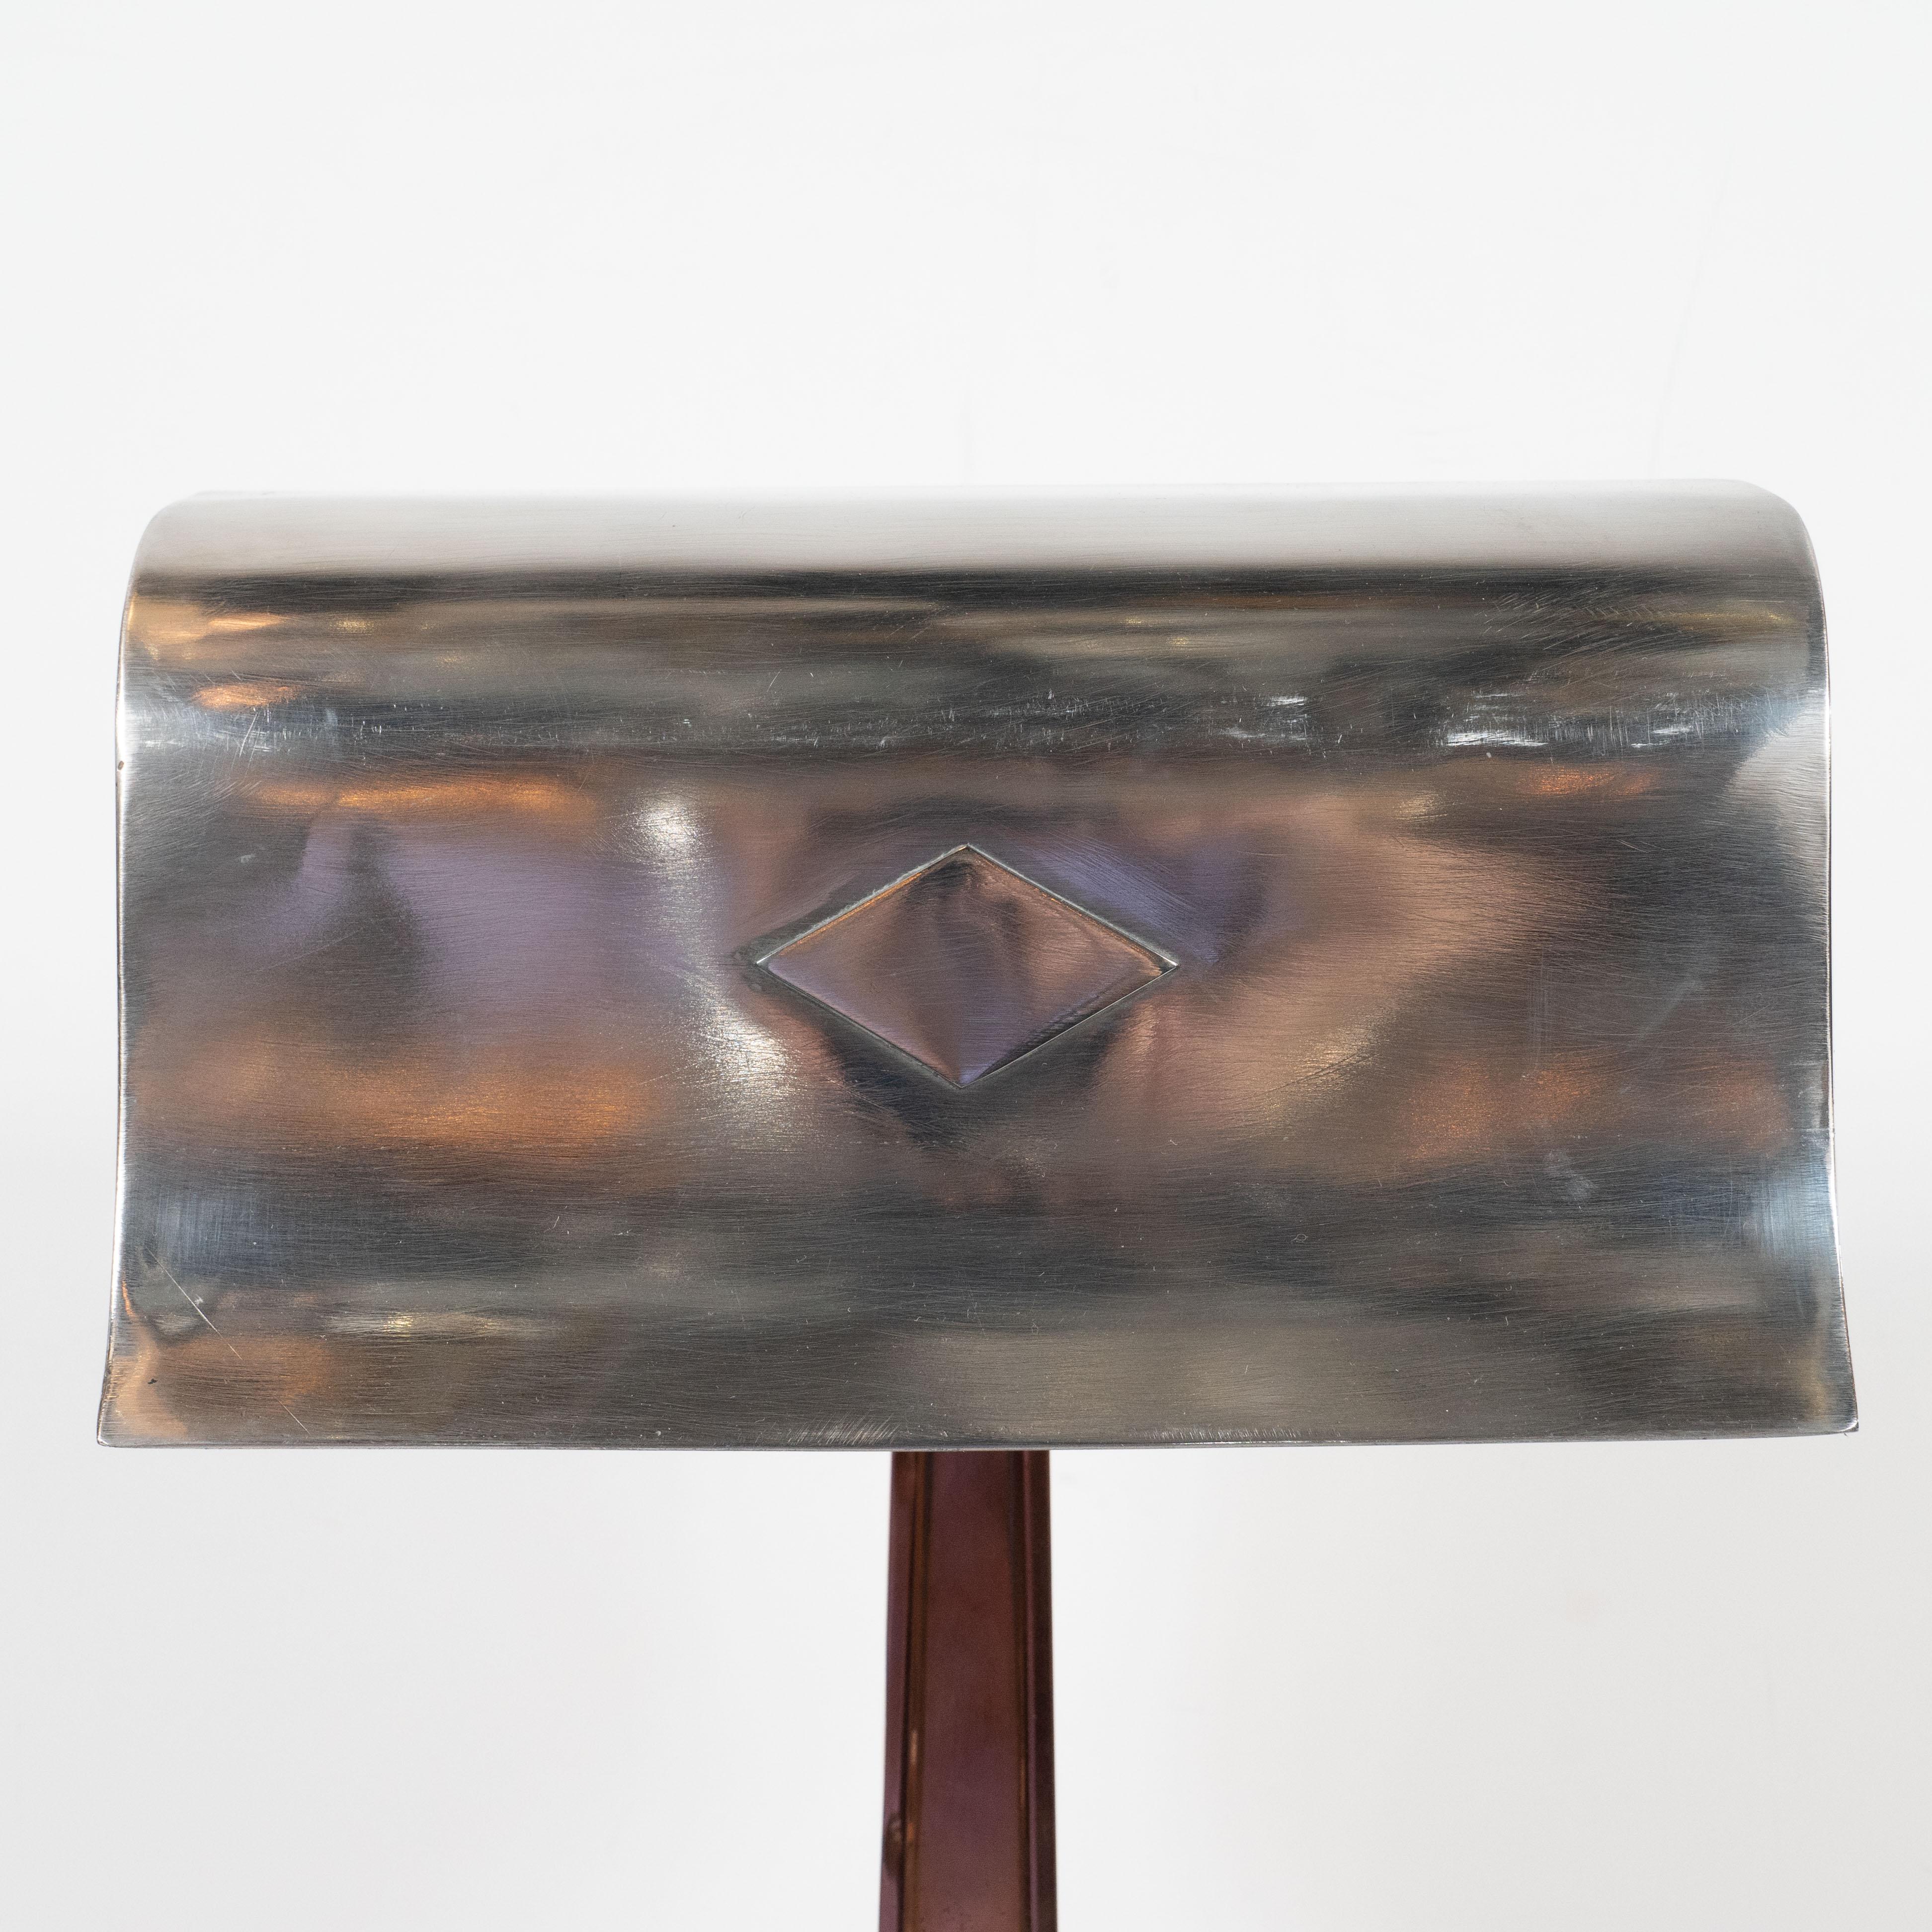 American Early Art Deco Copper & Polished Aluminum Table Lamp with Cubist Embellishment For Sale